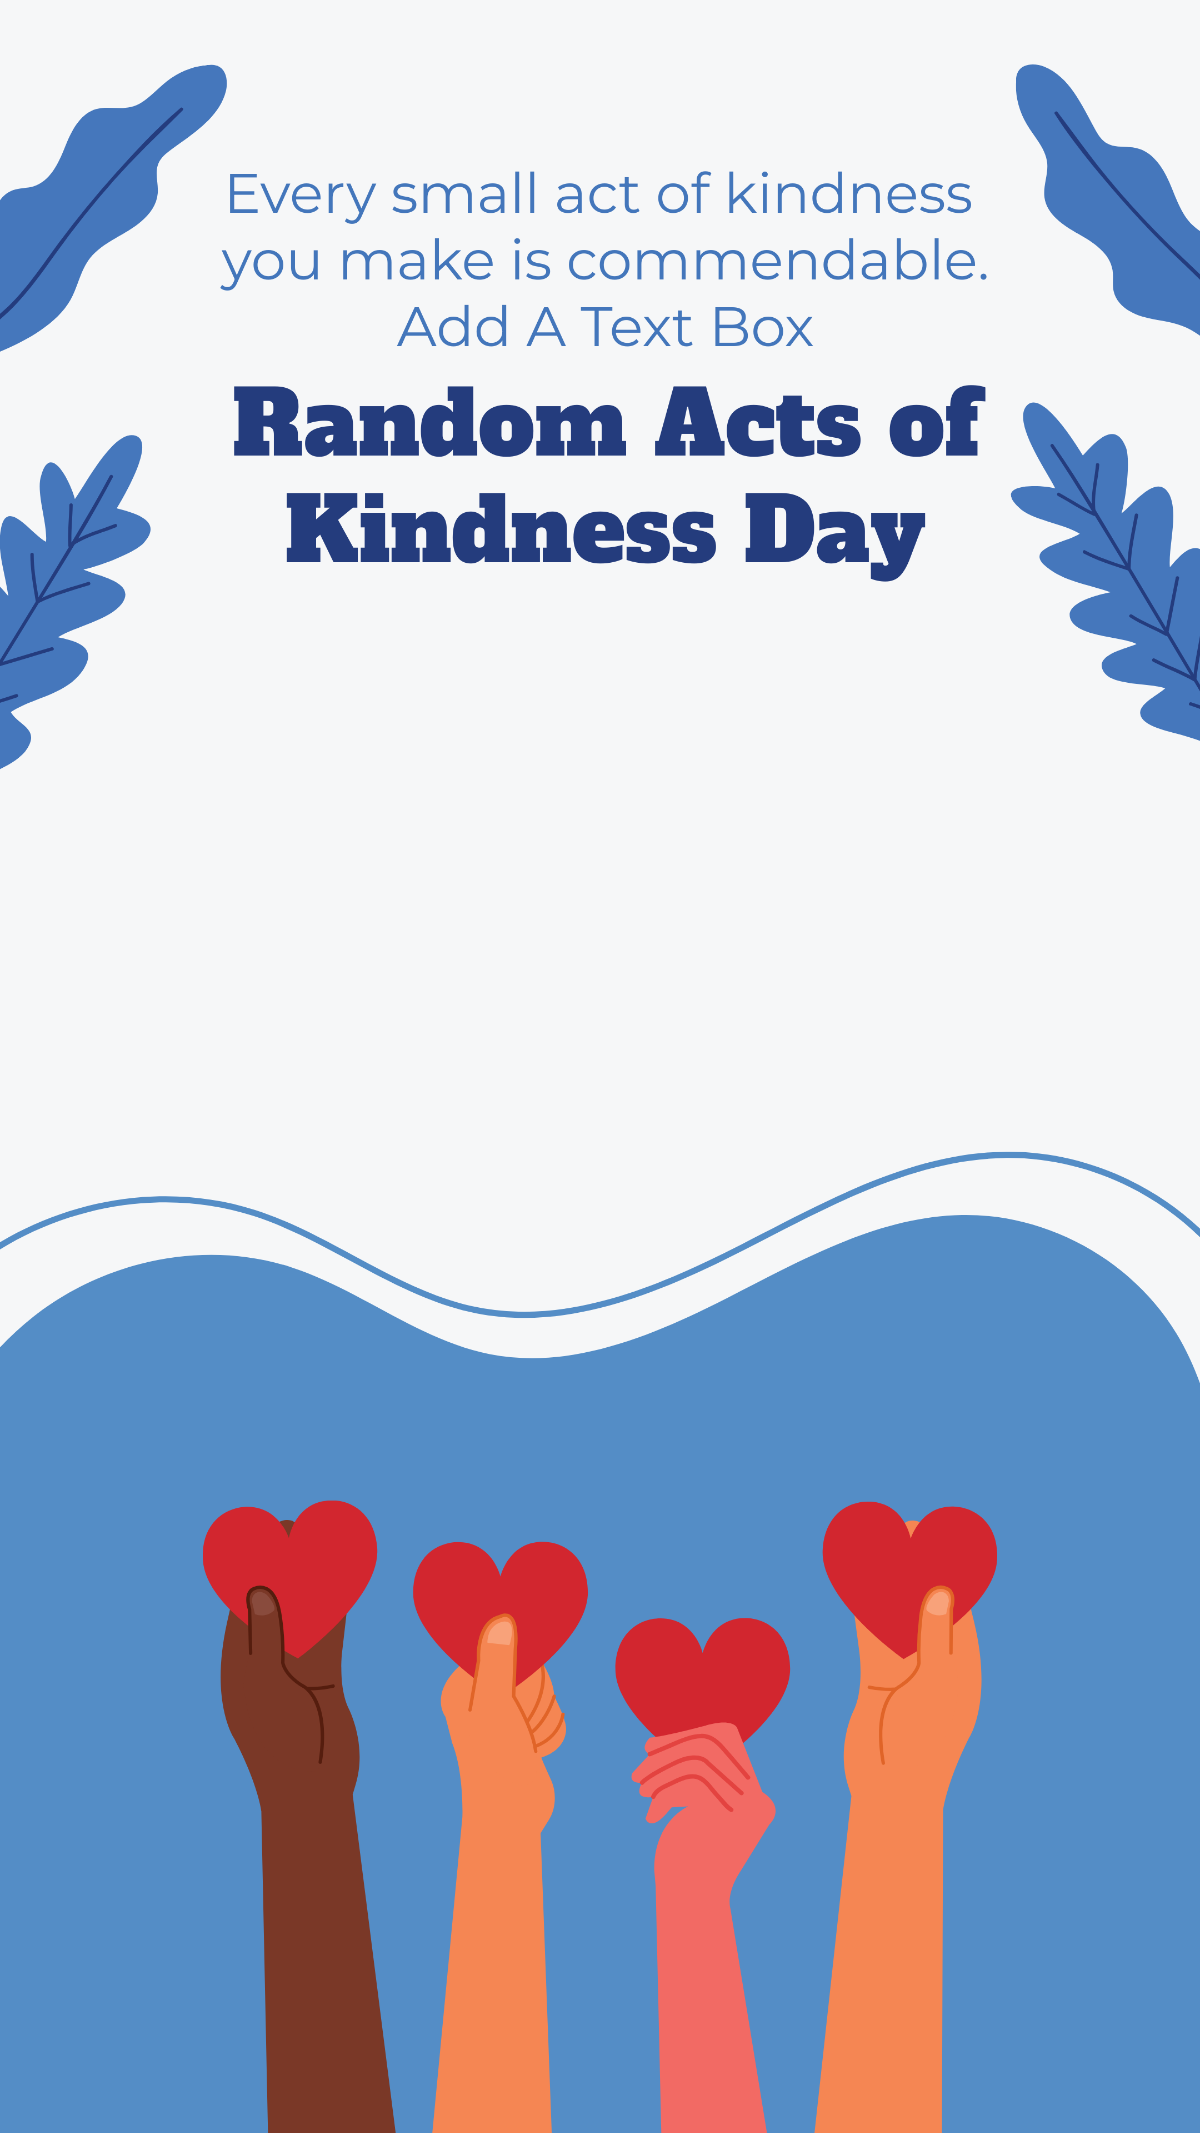 Random Acts of Kindness Day Snapchat Geofilter